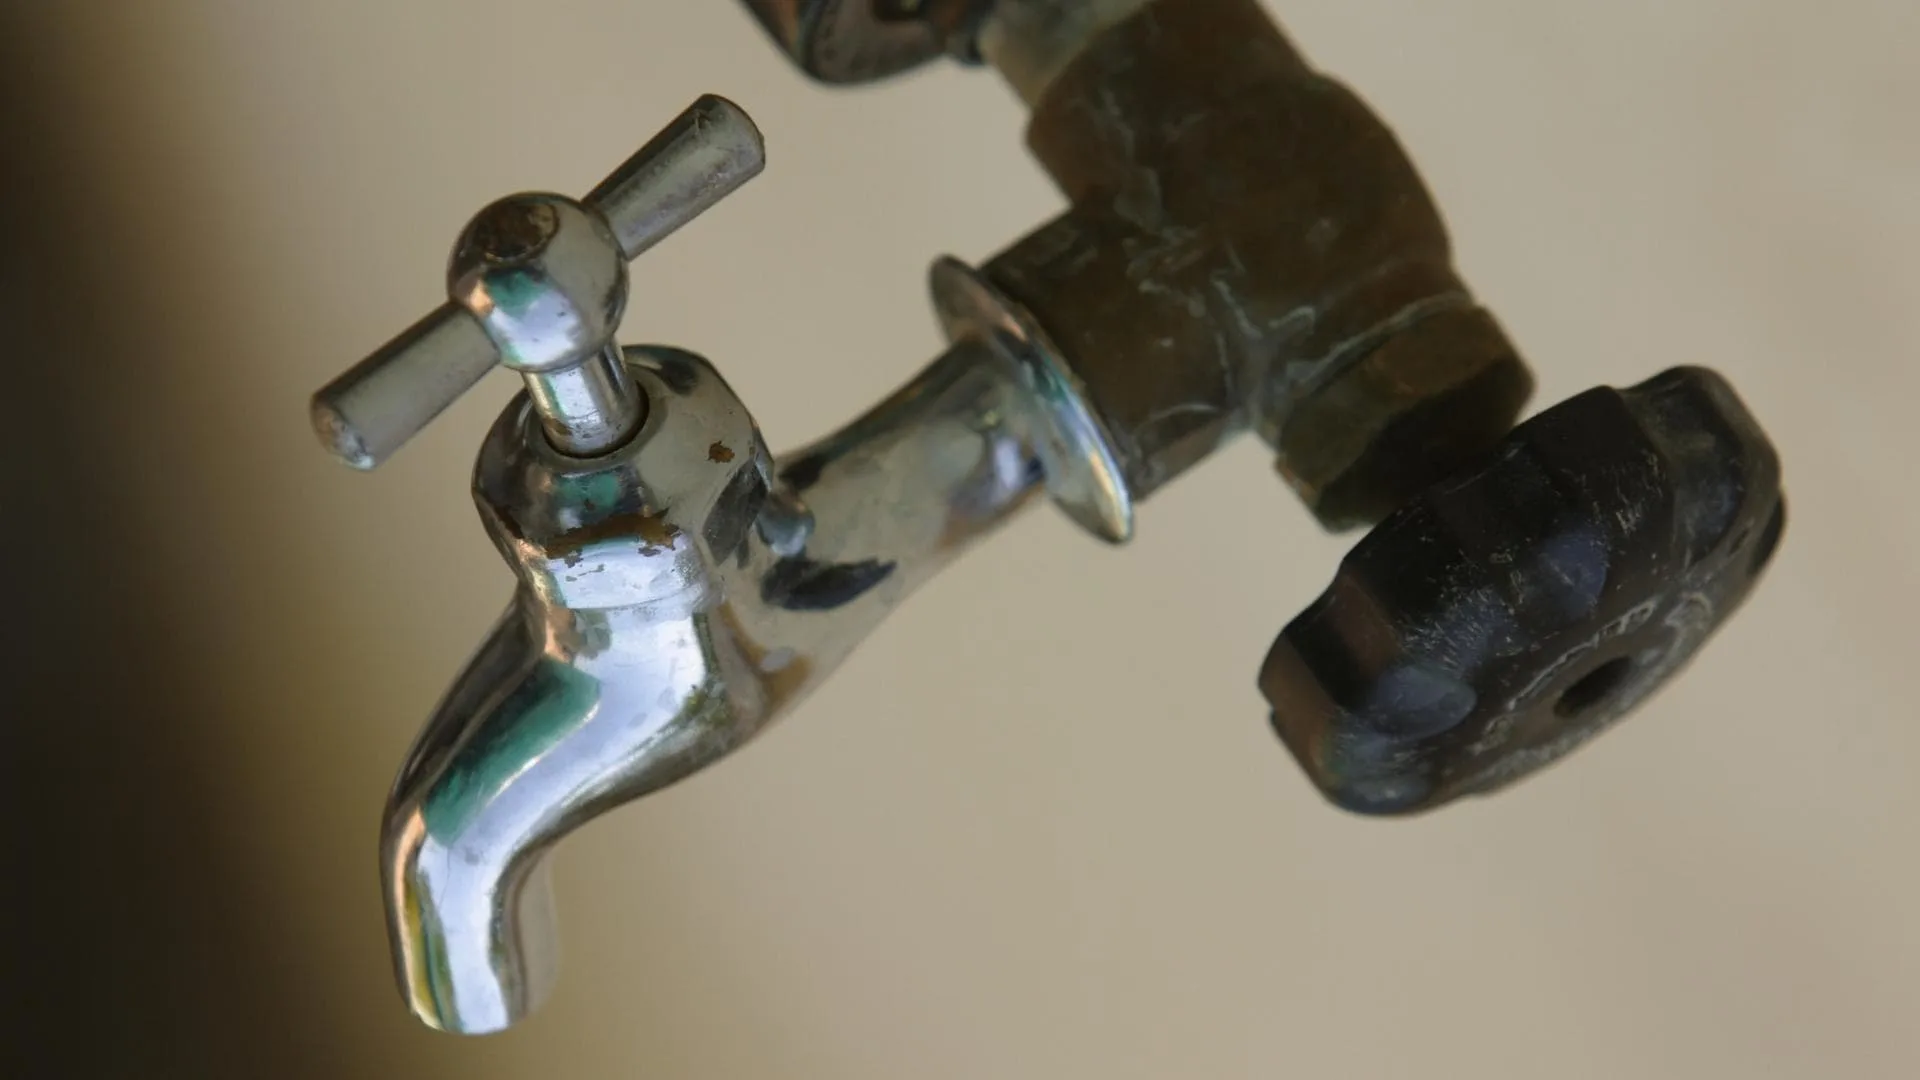 Photo of a threadless water spigot you couldn't screw a hose onto